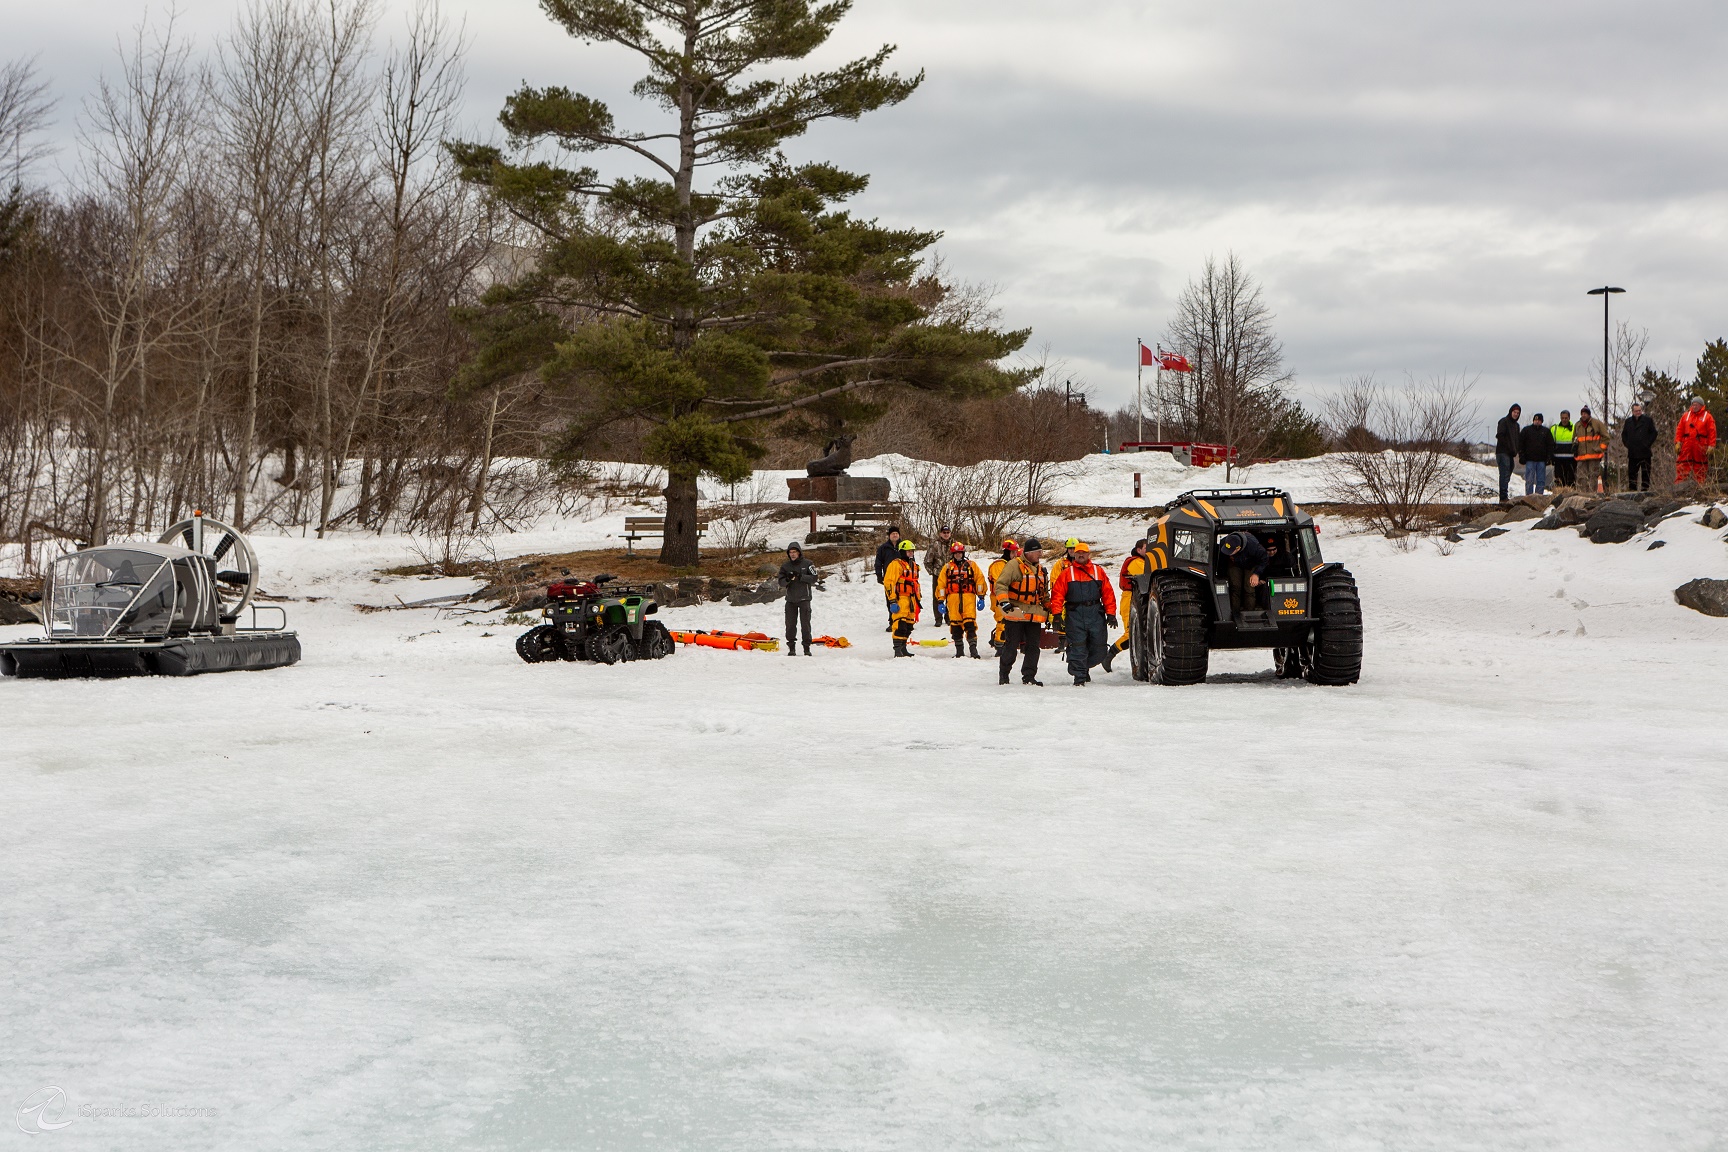 ATASD hovercraft airboat and SHERP ATV at Joint Rescue Training